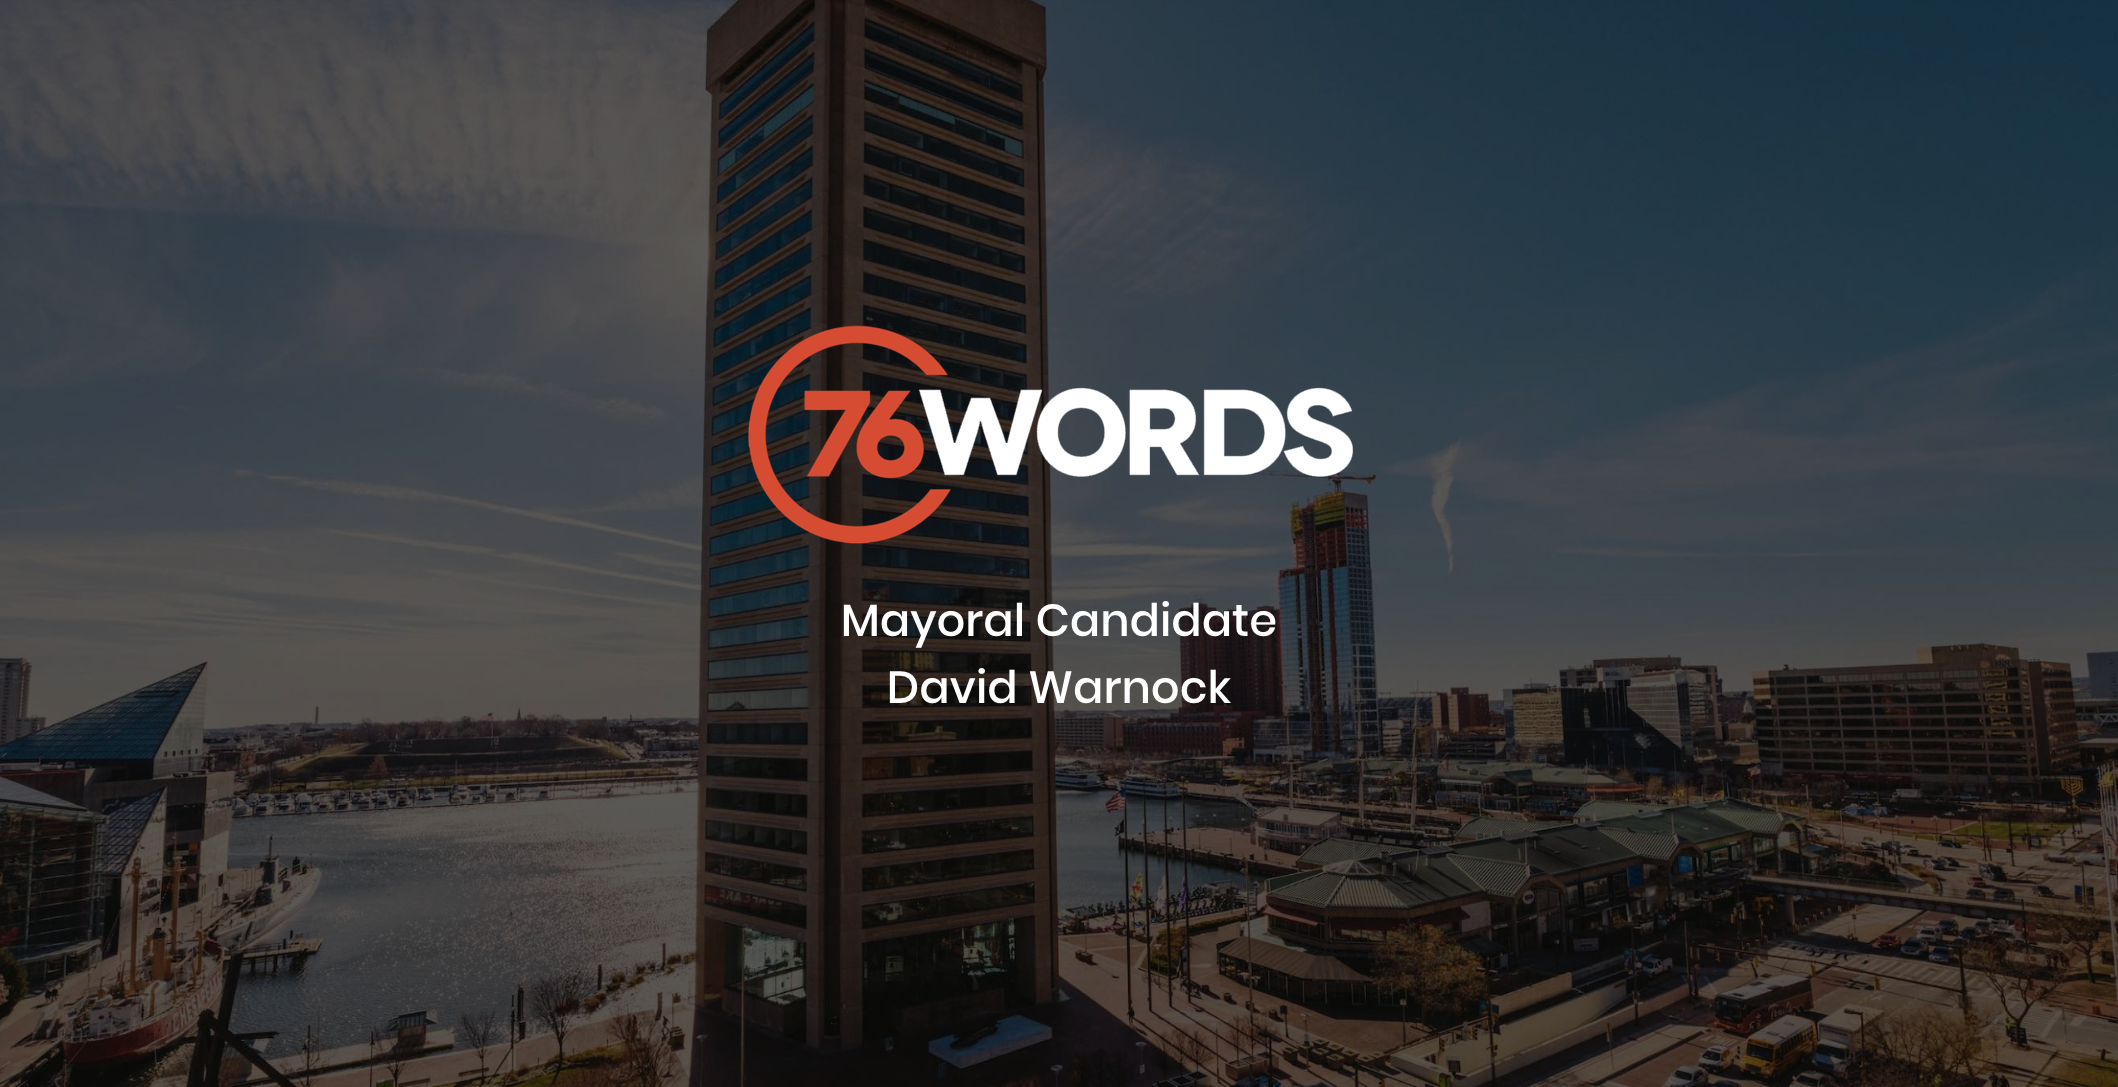 White and orange 76 Words Mayoral Candidate David Warnock logo with dimmed background view of tall skyscraper in a city